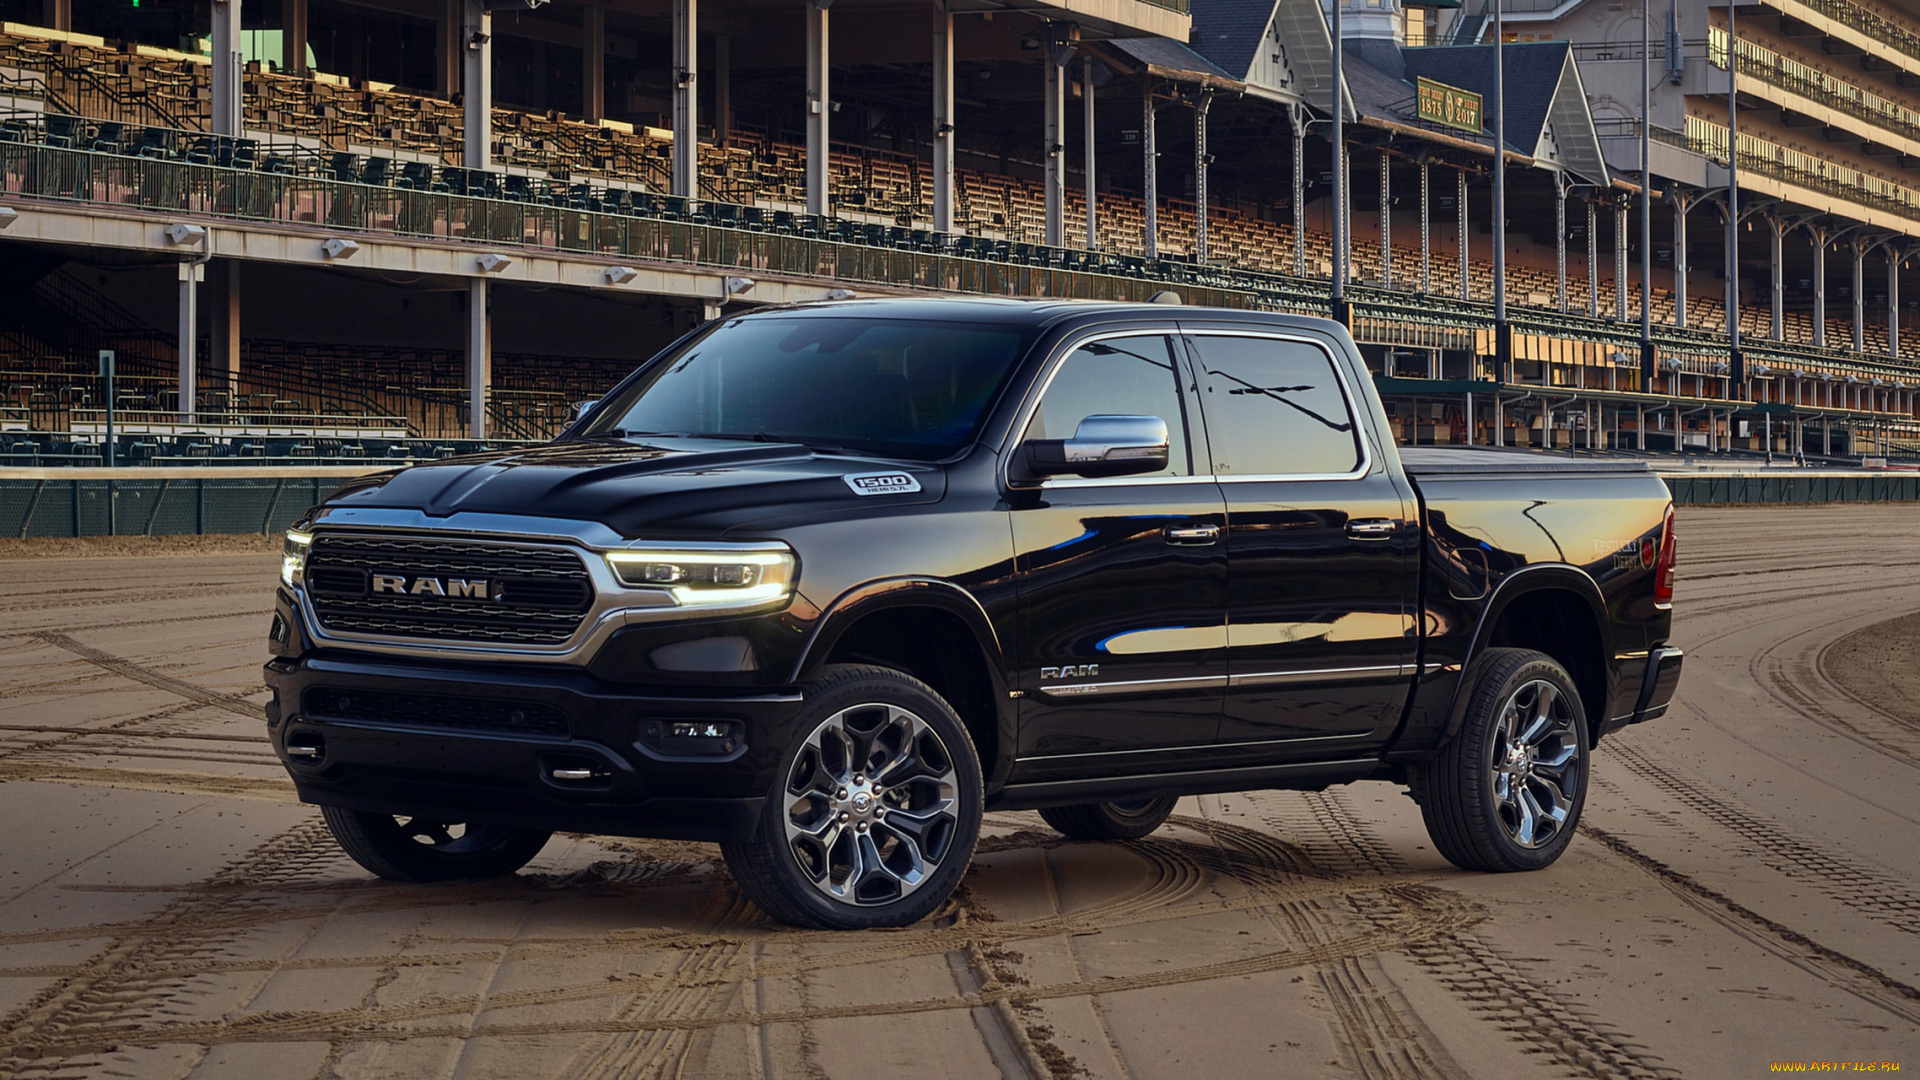 dodge, ram, 1500, kentucky, derby, limited, edition, 2019, автомобили, ram, limited, derby, kentucky, 1500, 2019, dodge, edition